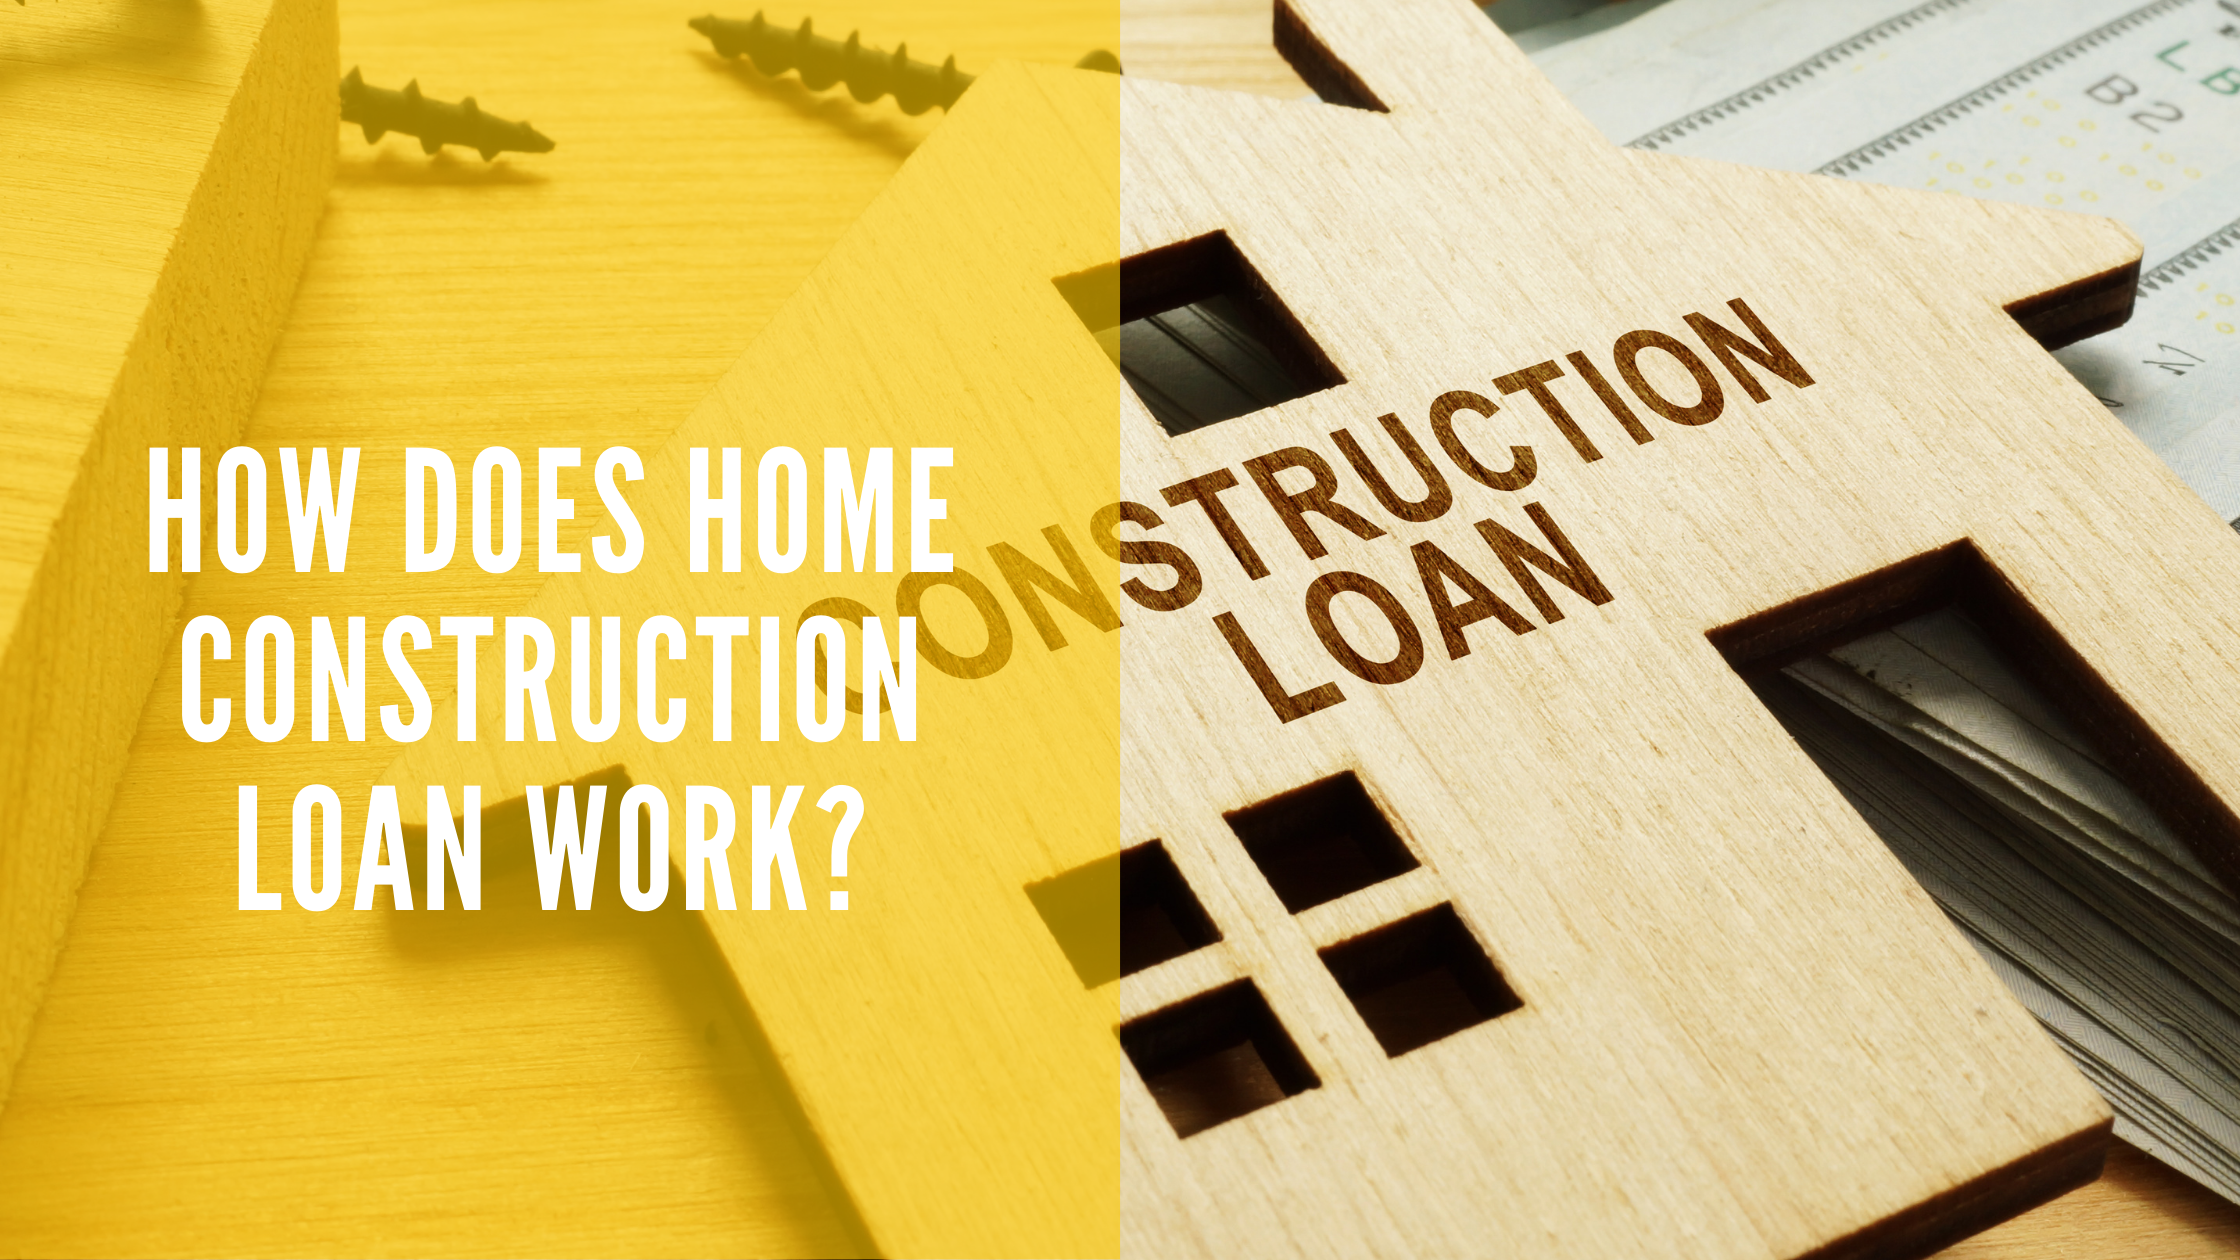 How Does Home Construction Loan Work?